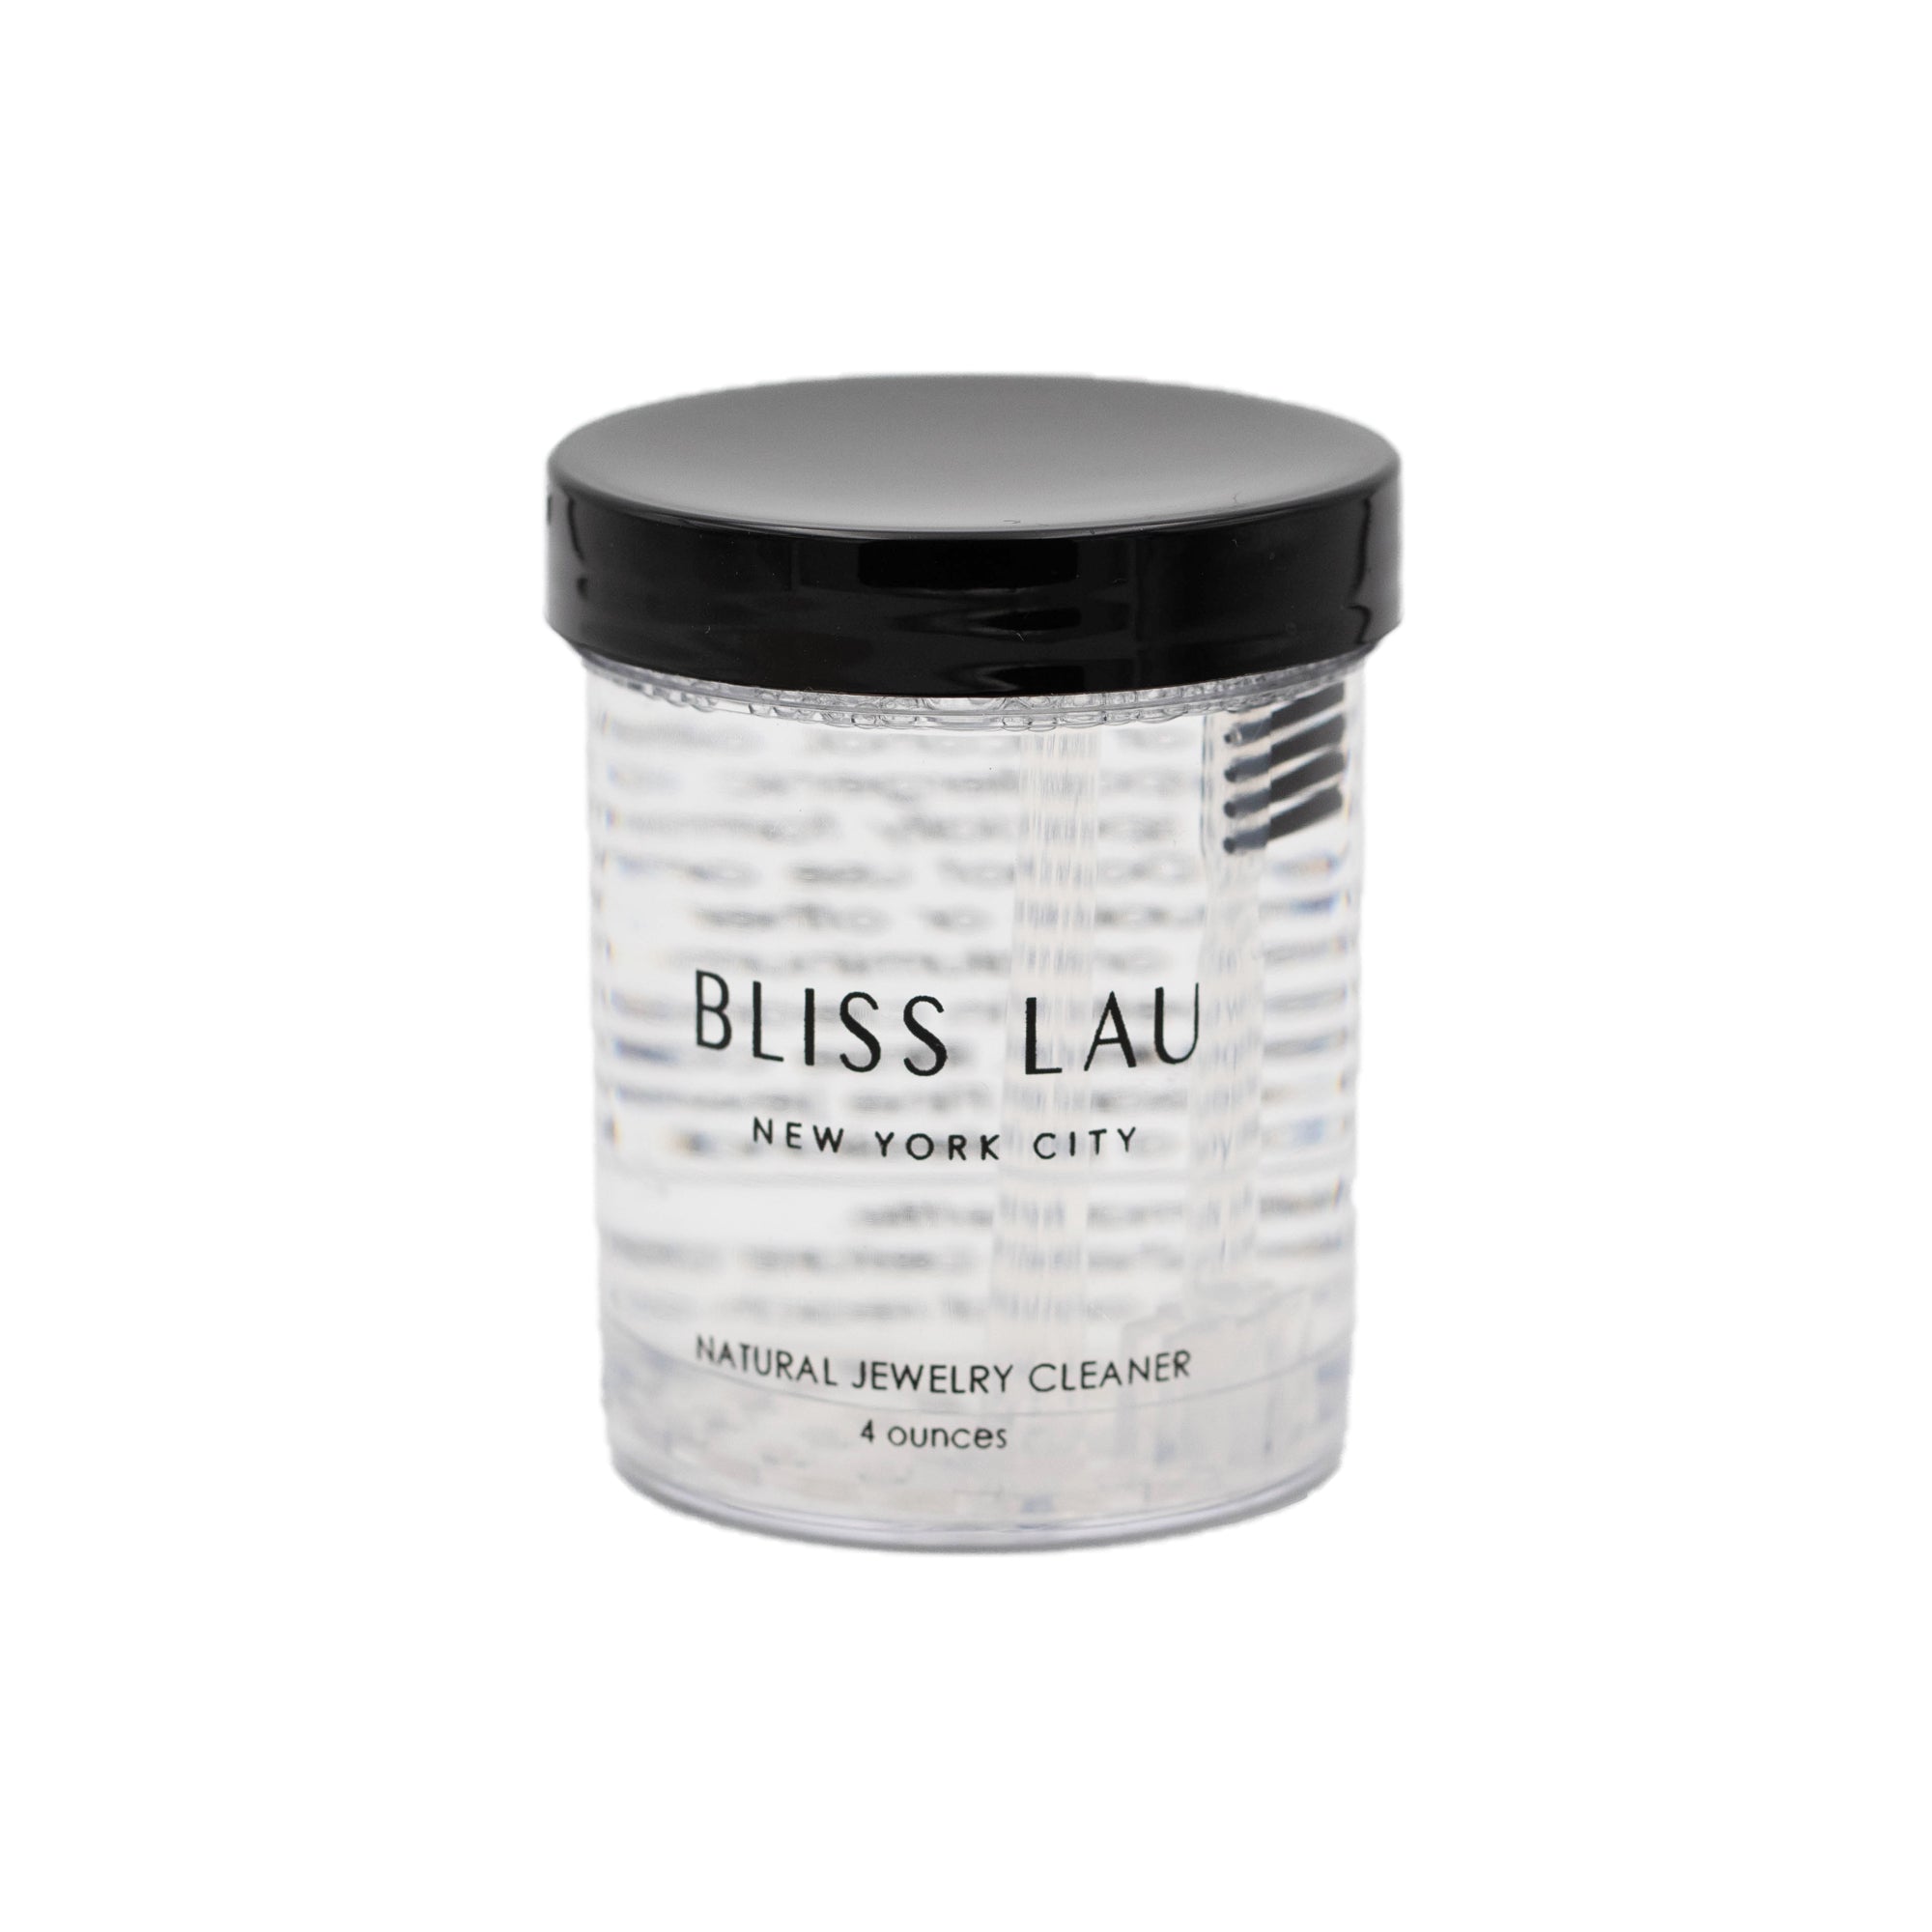 jewelry cleaner by Bliss Lau